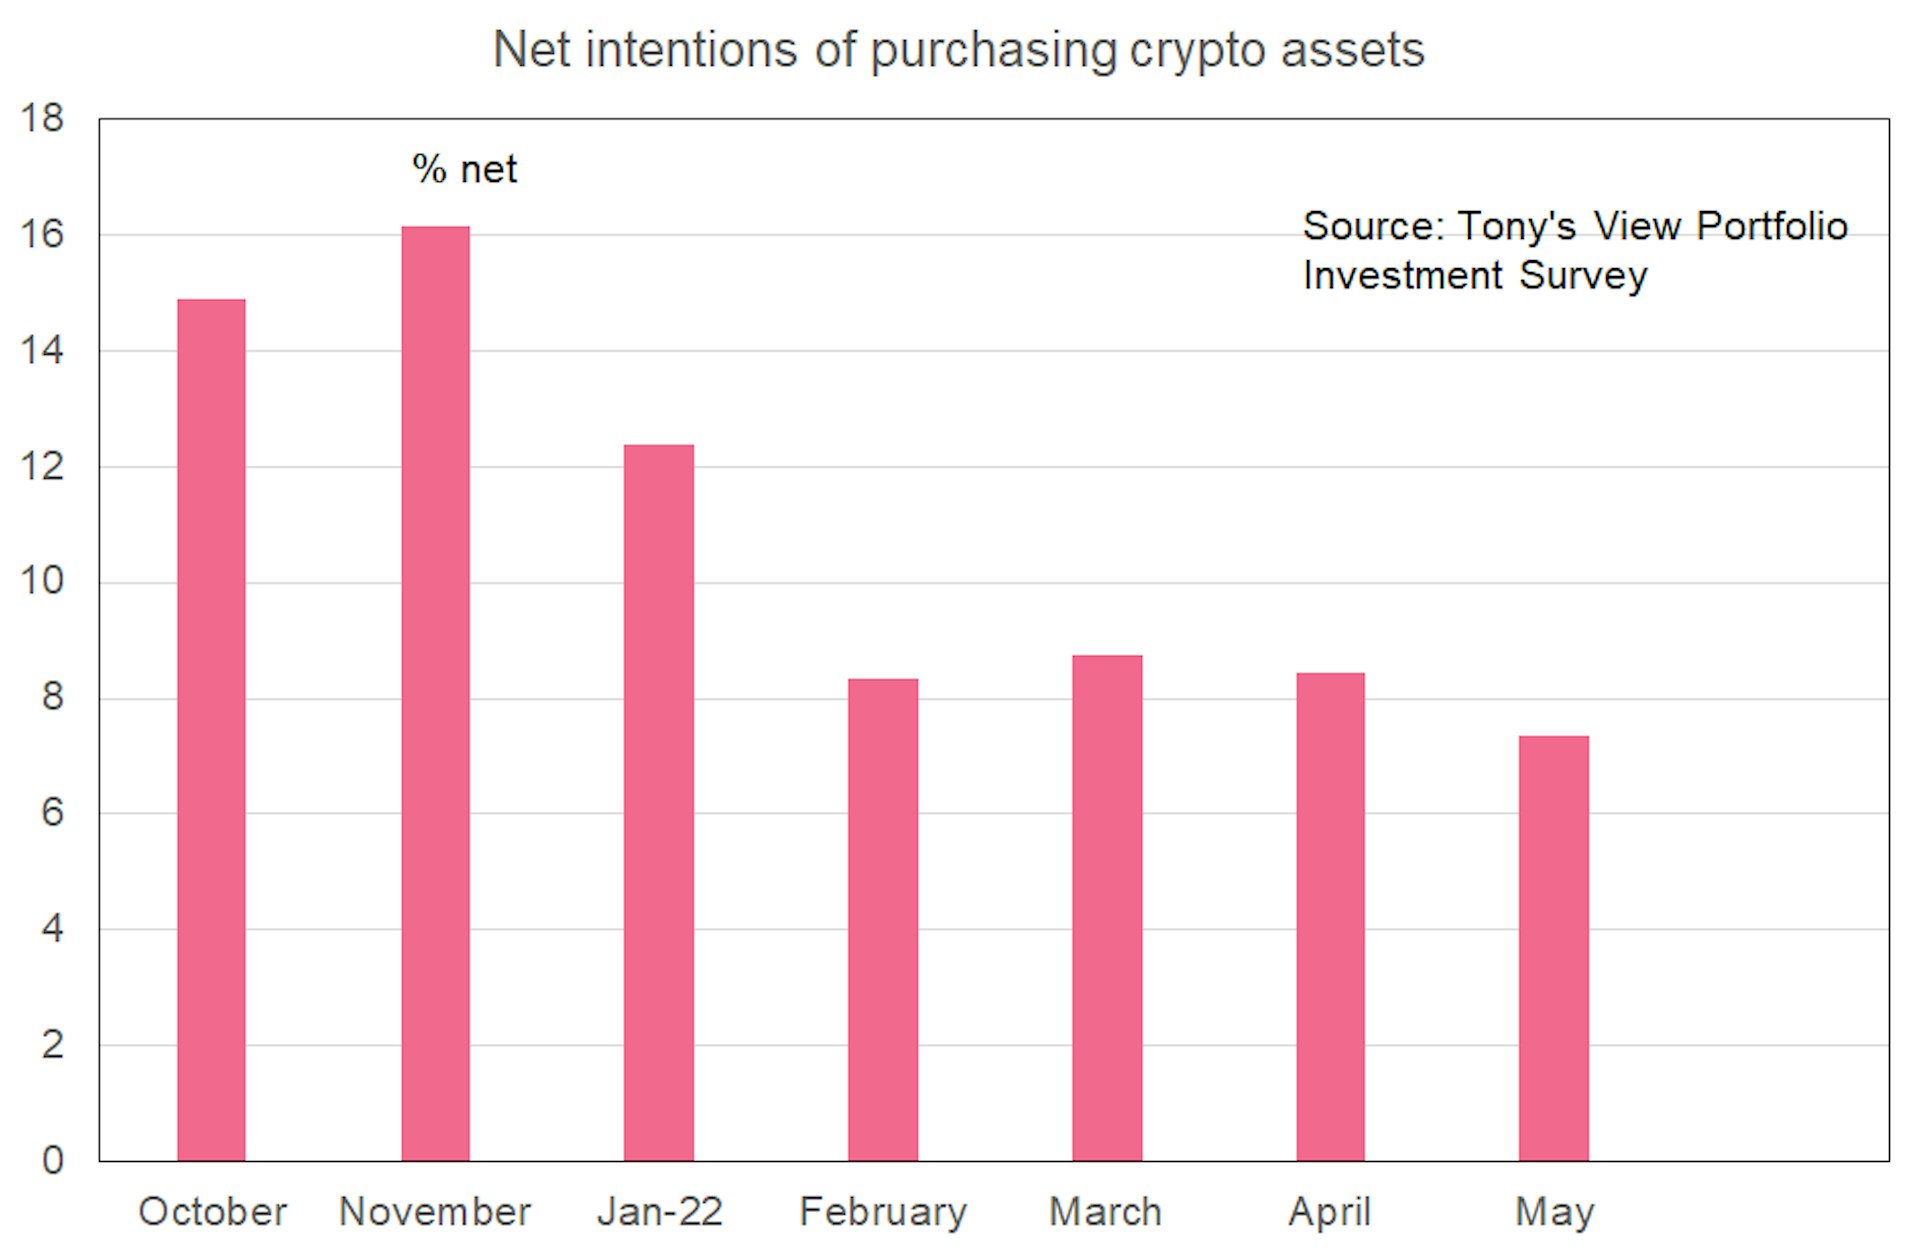 A pink bar graph showing net intentions of purchasing crypto assets falling from a peak of 16% in November 2021, to a low of just under 8% in May 2022.